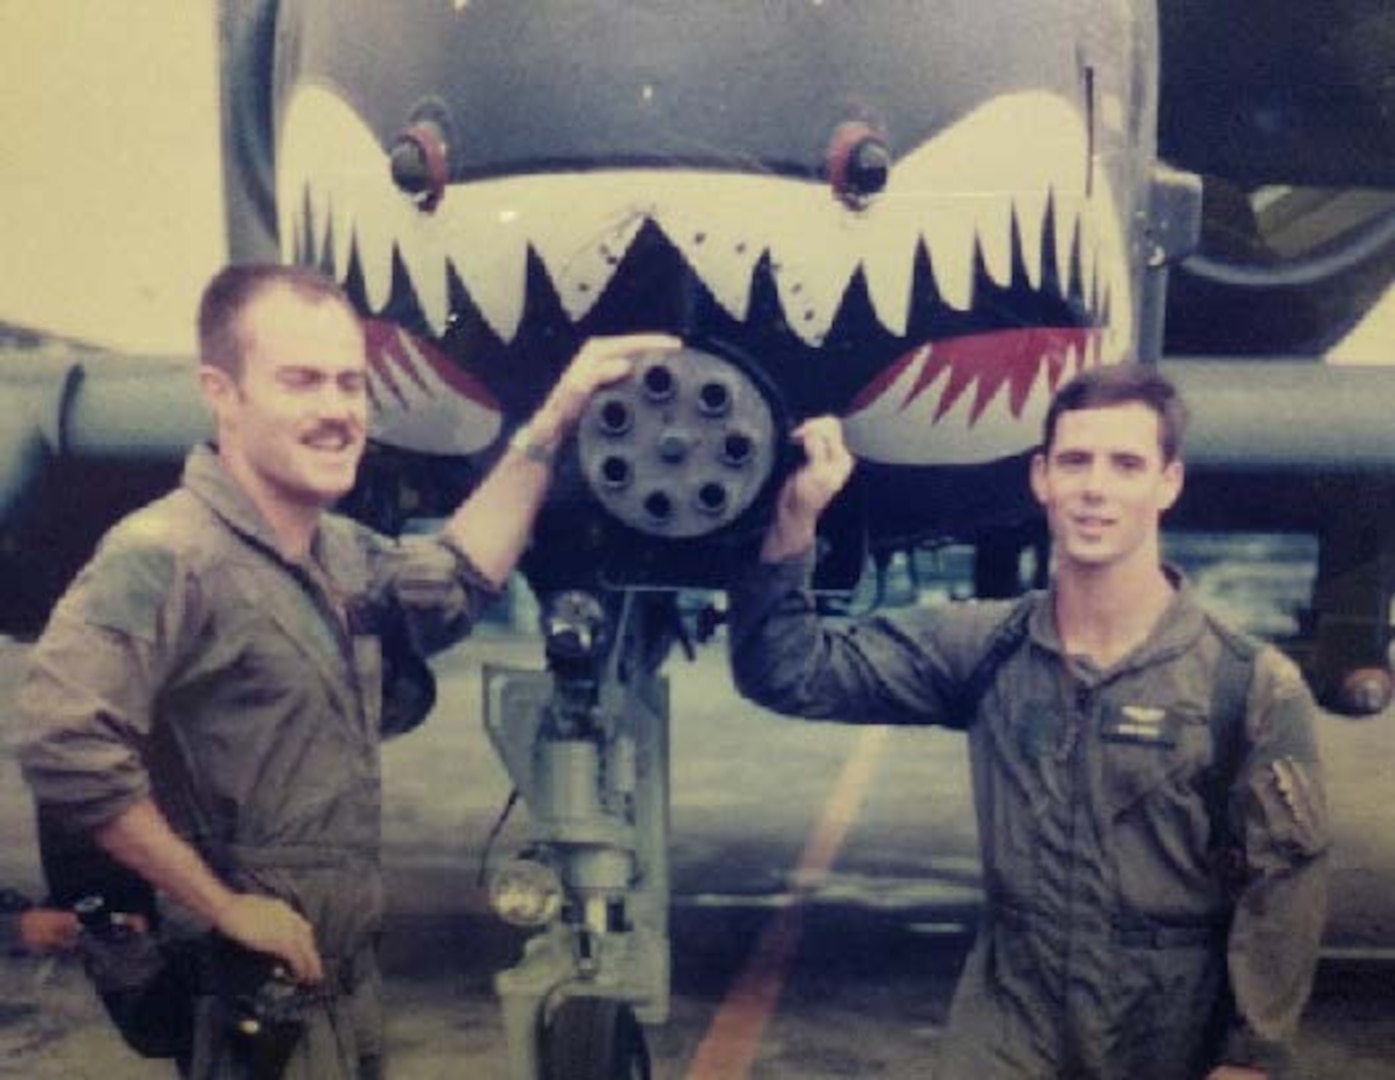 Picture of Capt. Eric "Fish" Salmonson and 1st Lt. John "Karl" Marks